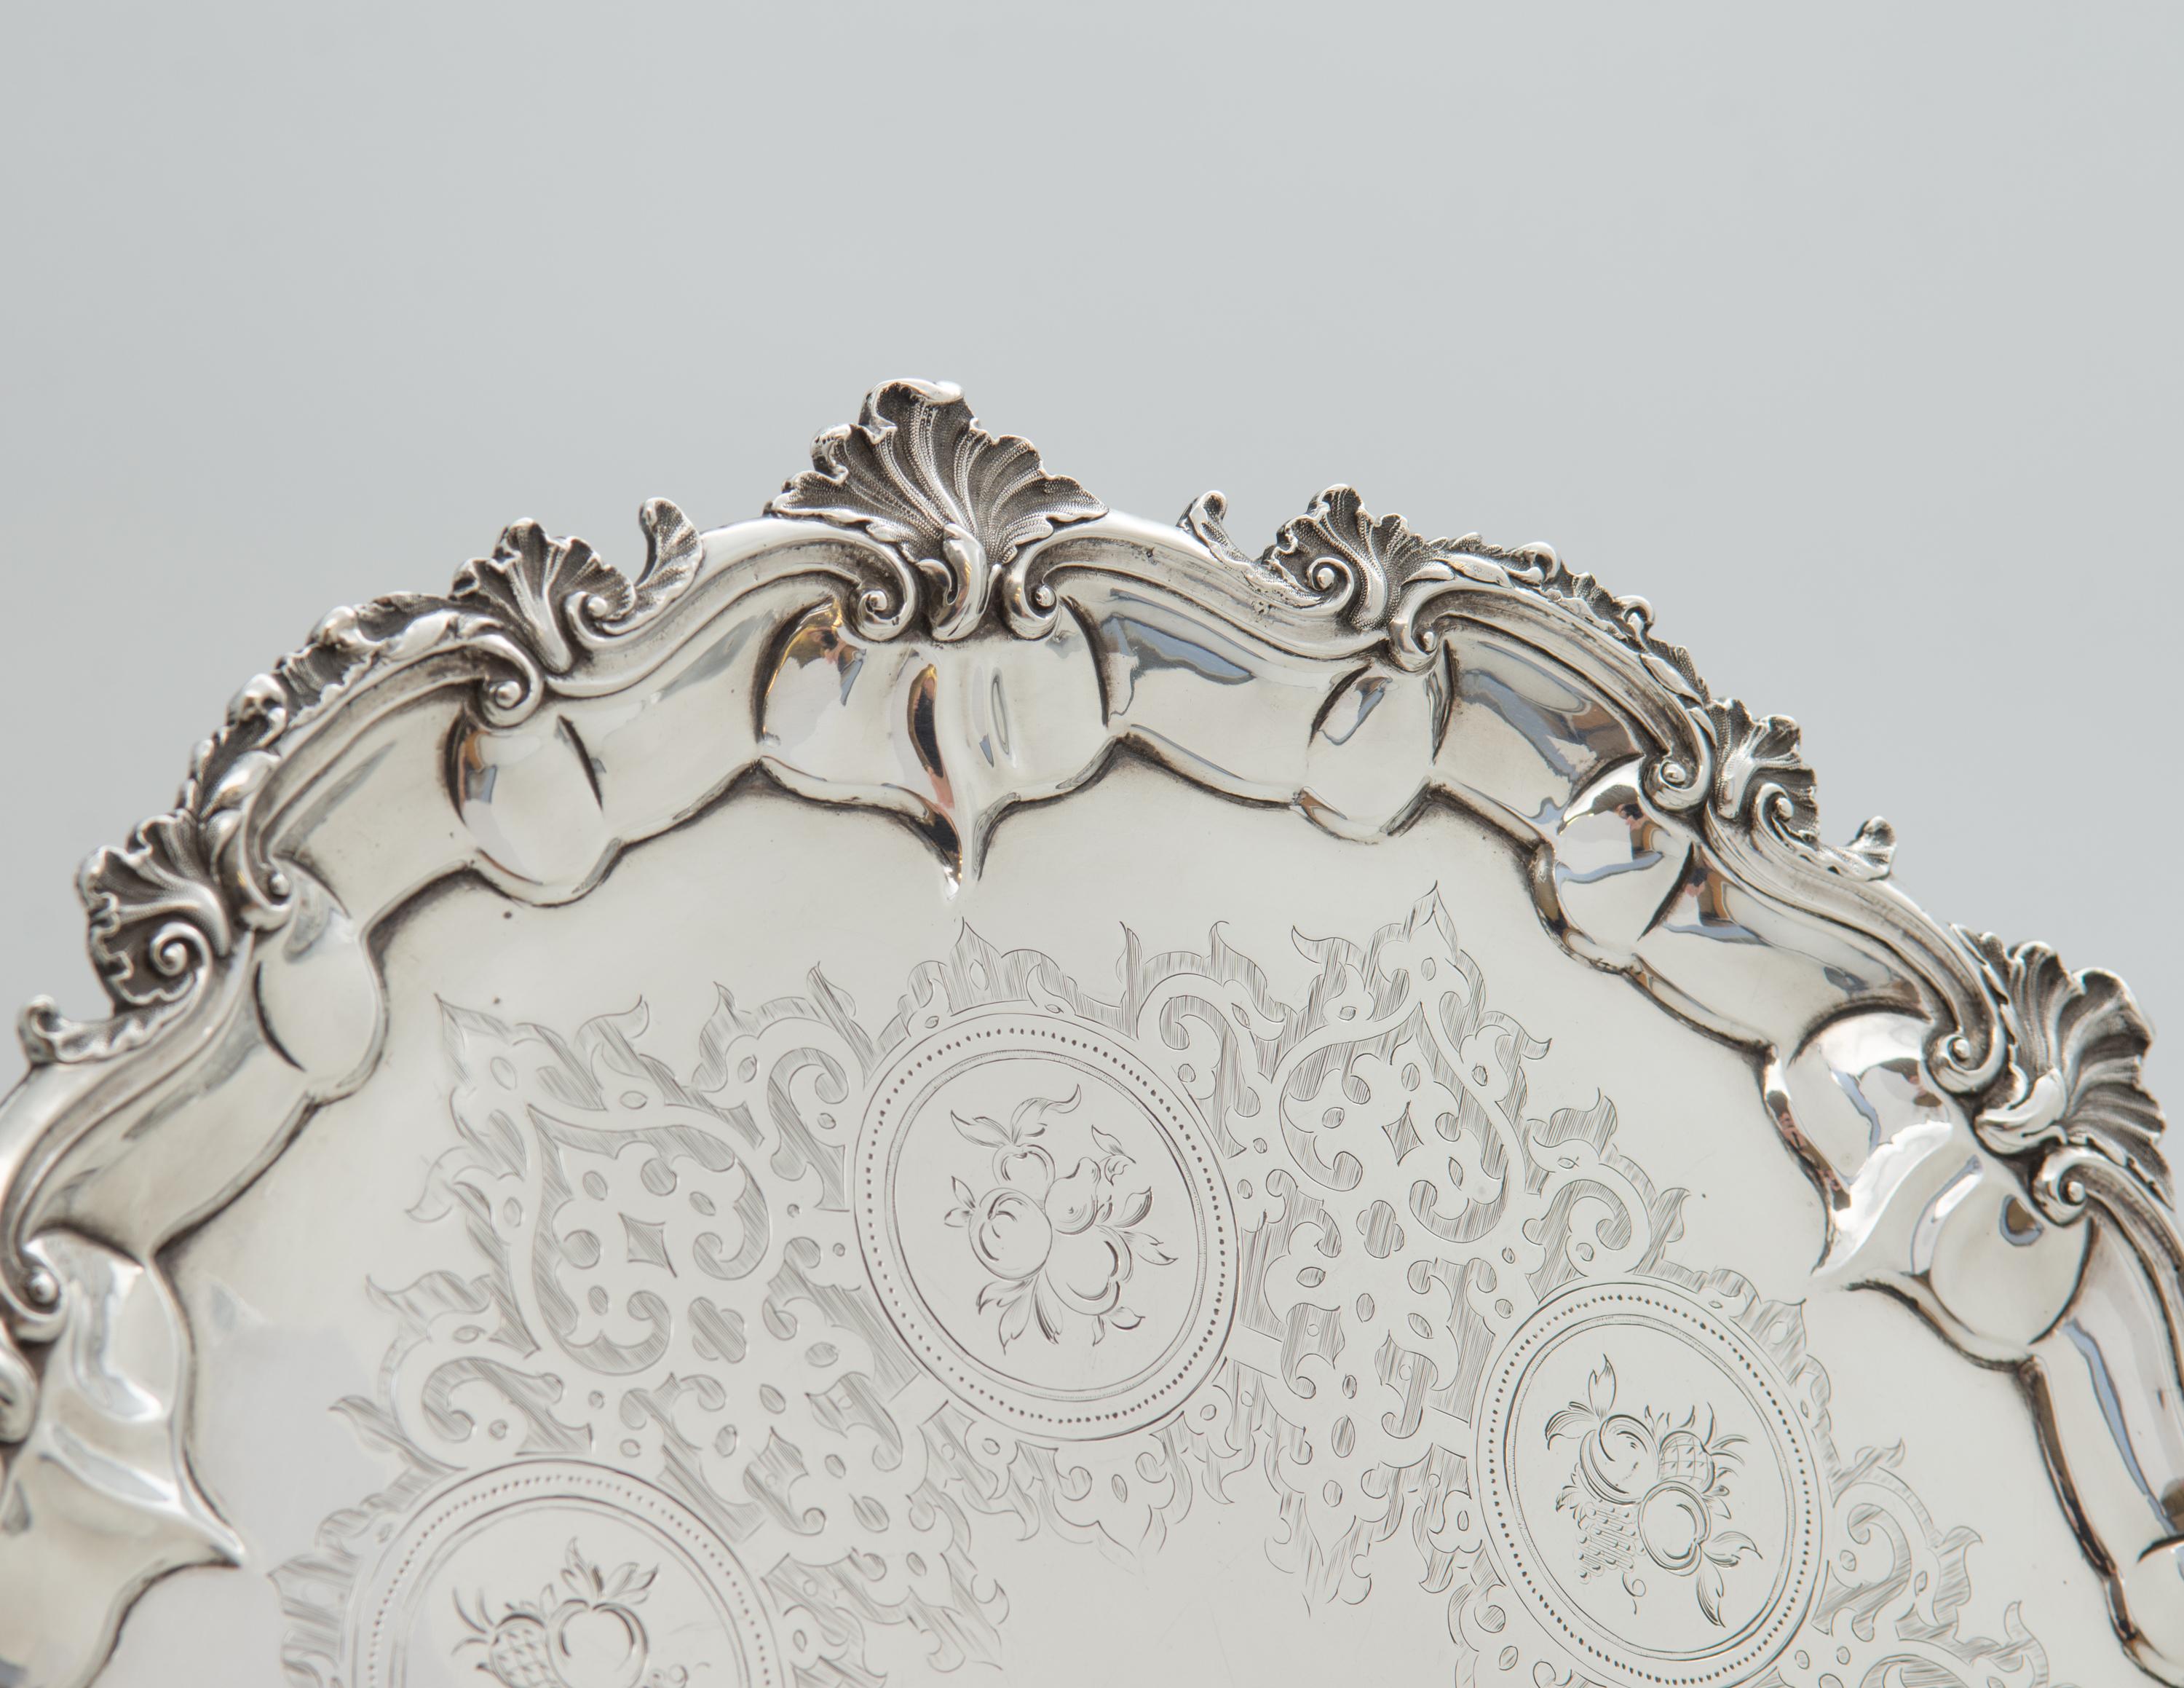 Antique Victorian sterling silver salver, hallmarked in London by Robert Harper in 1859.

The salver has a pie crust edge with scroll and shell border, raised on three cast scrolled feet. The field is beautifully hand engraved, depicting various